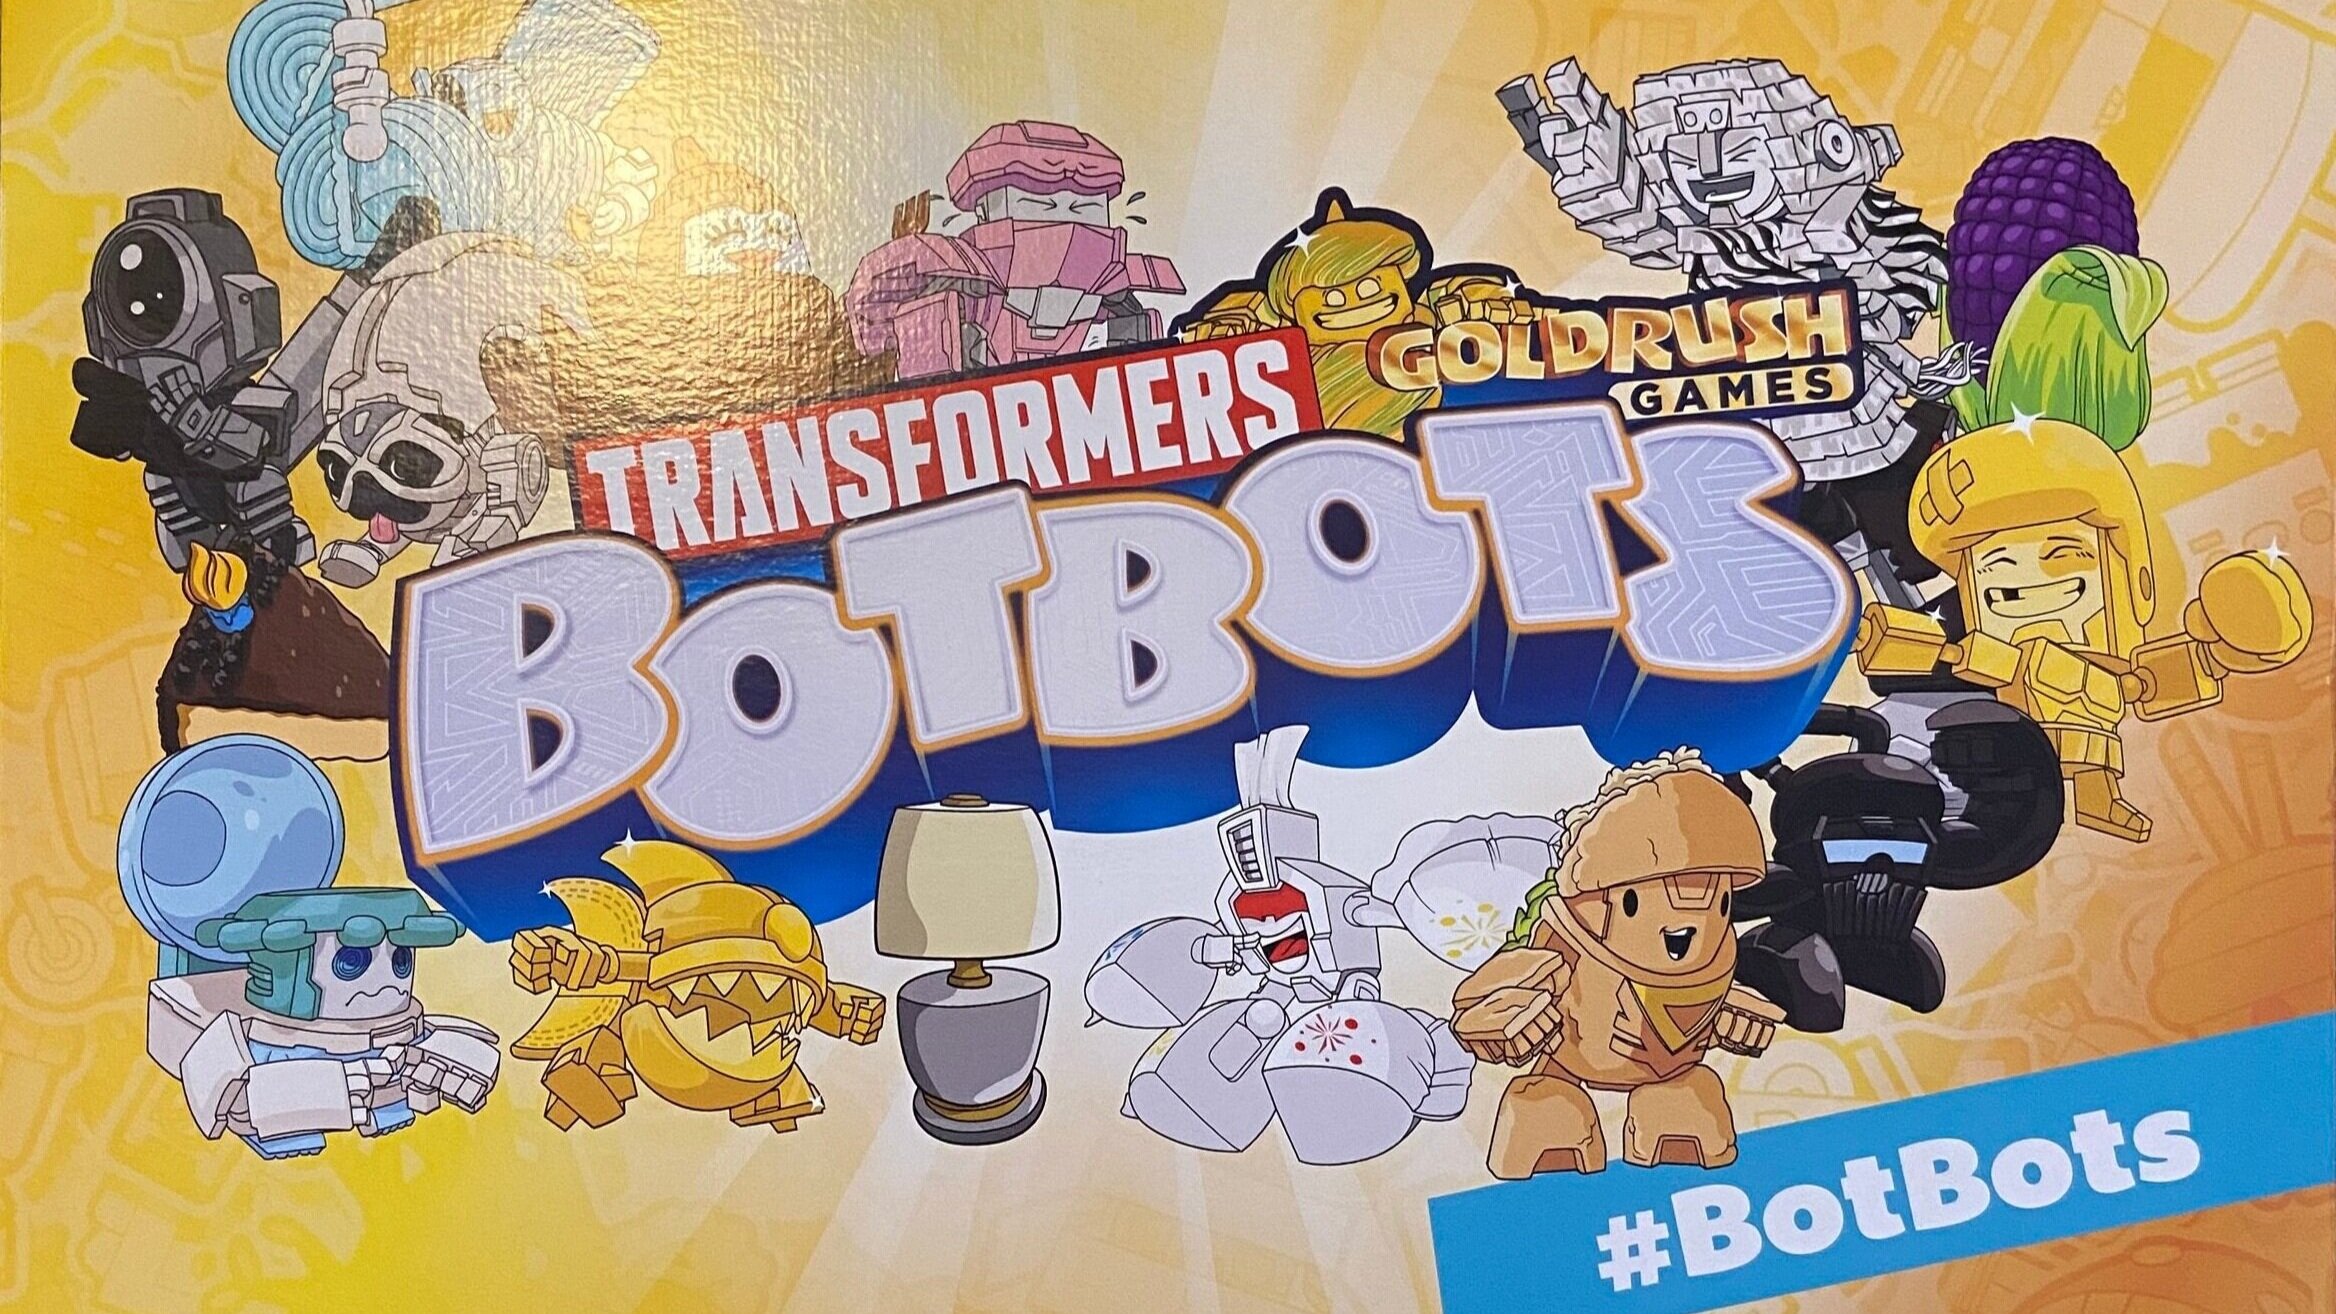 HASBRO'S TRANSFORMERS BOTBOT Series 5 With GOLDRUSH GAMES Review —  GeekTyrant